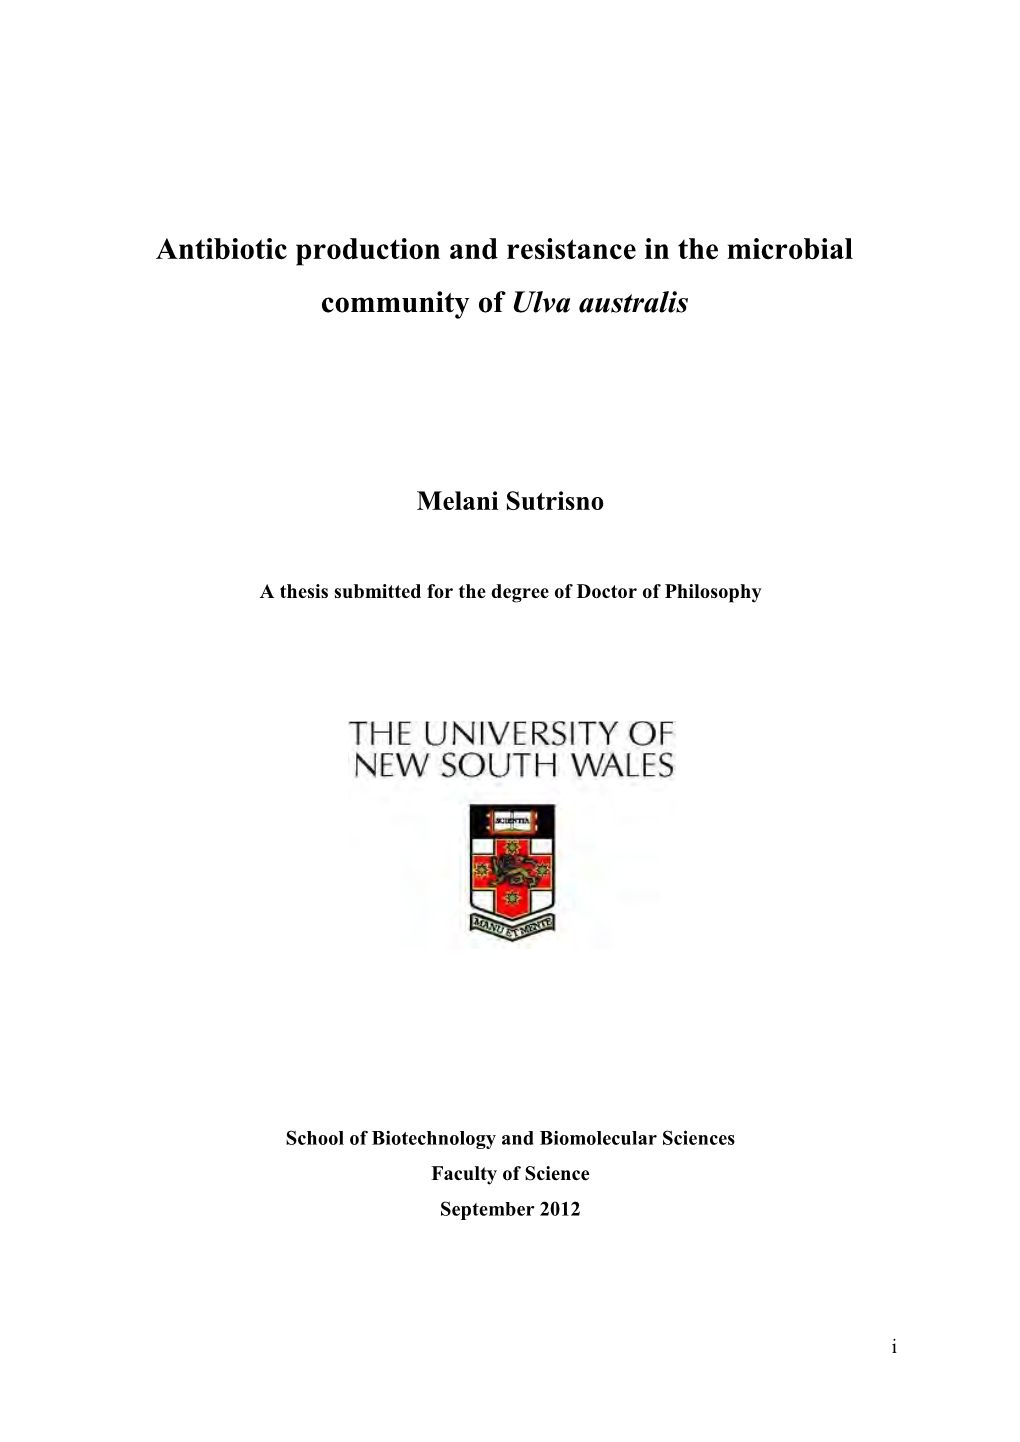 Antibiotic Production and Resistance in the Microbial Community of Ulva Australis